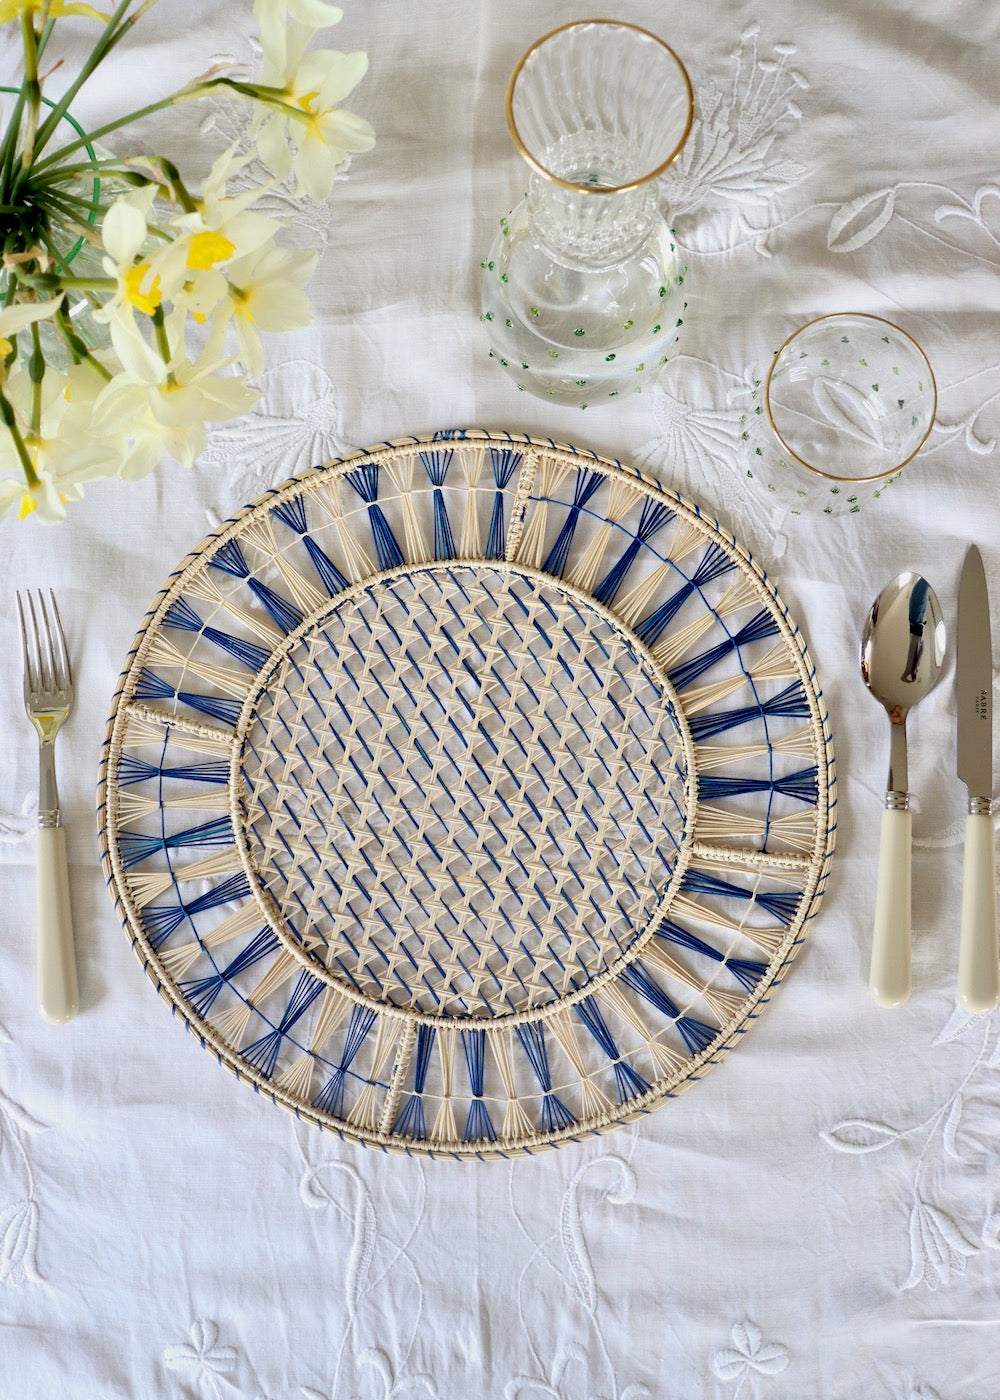 Placemat - Striped Blue